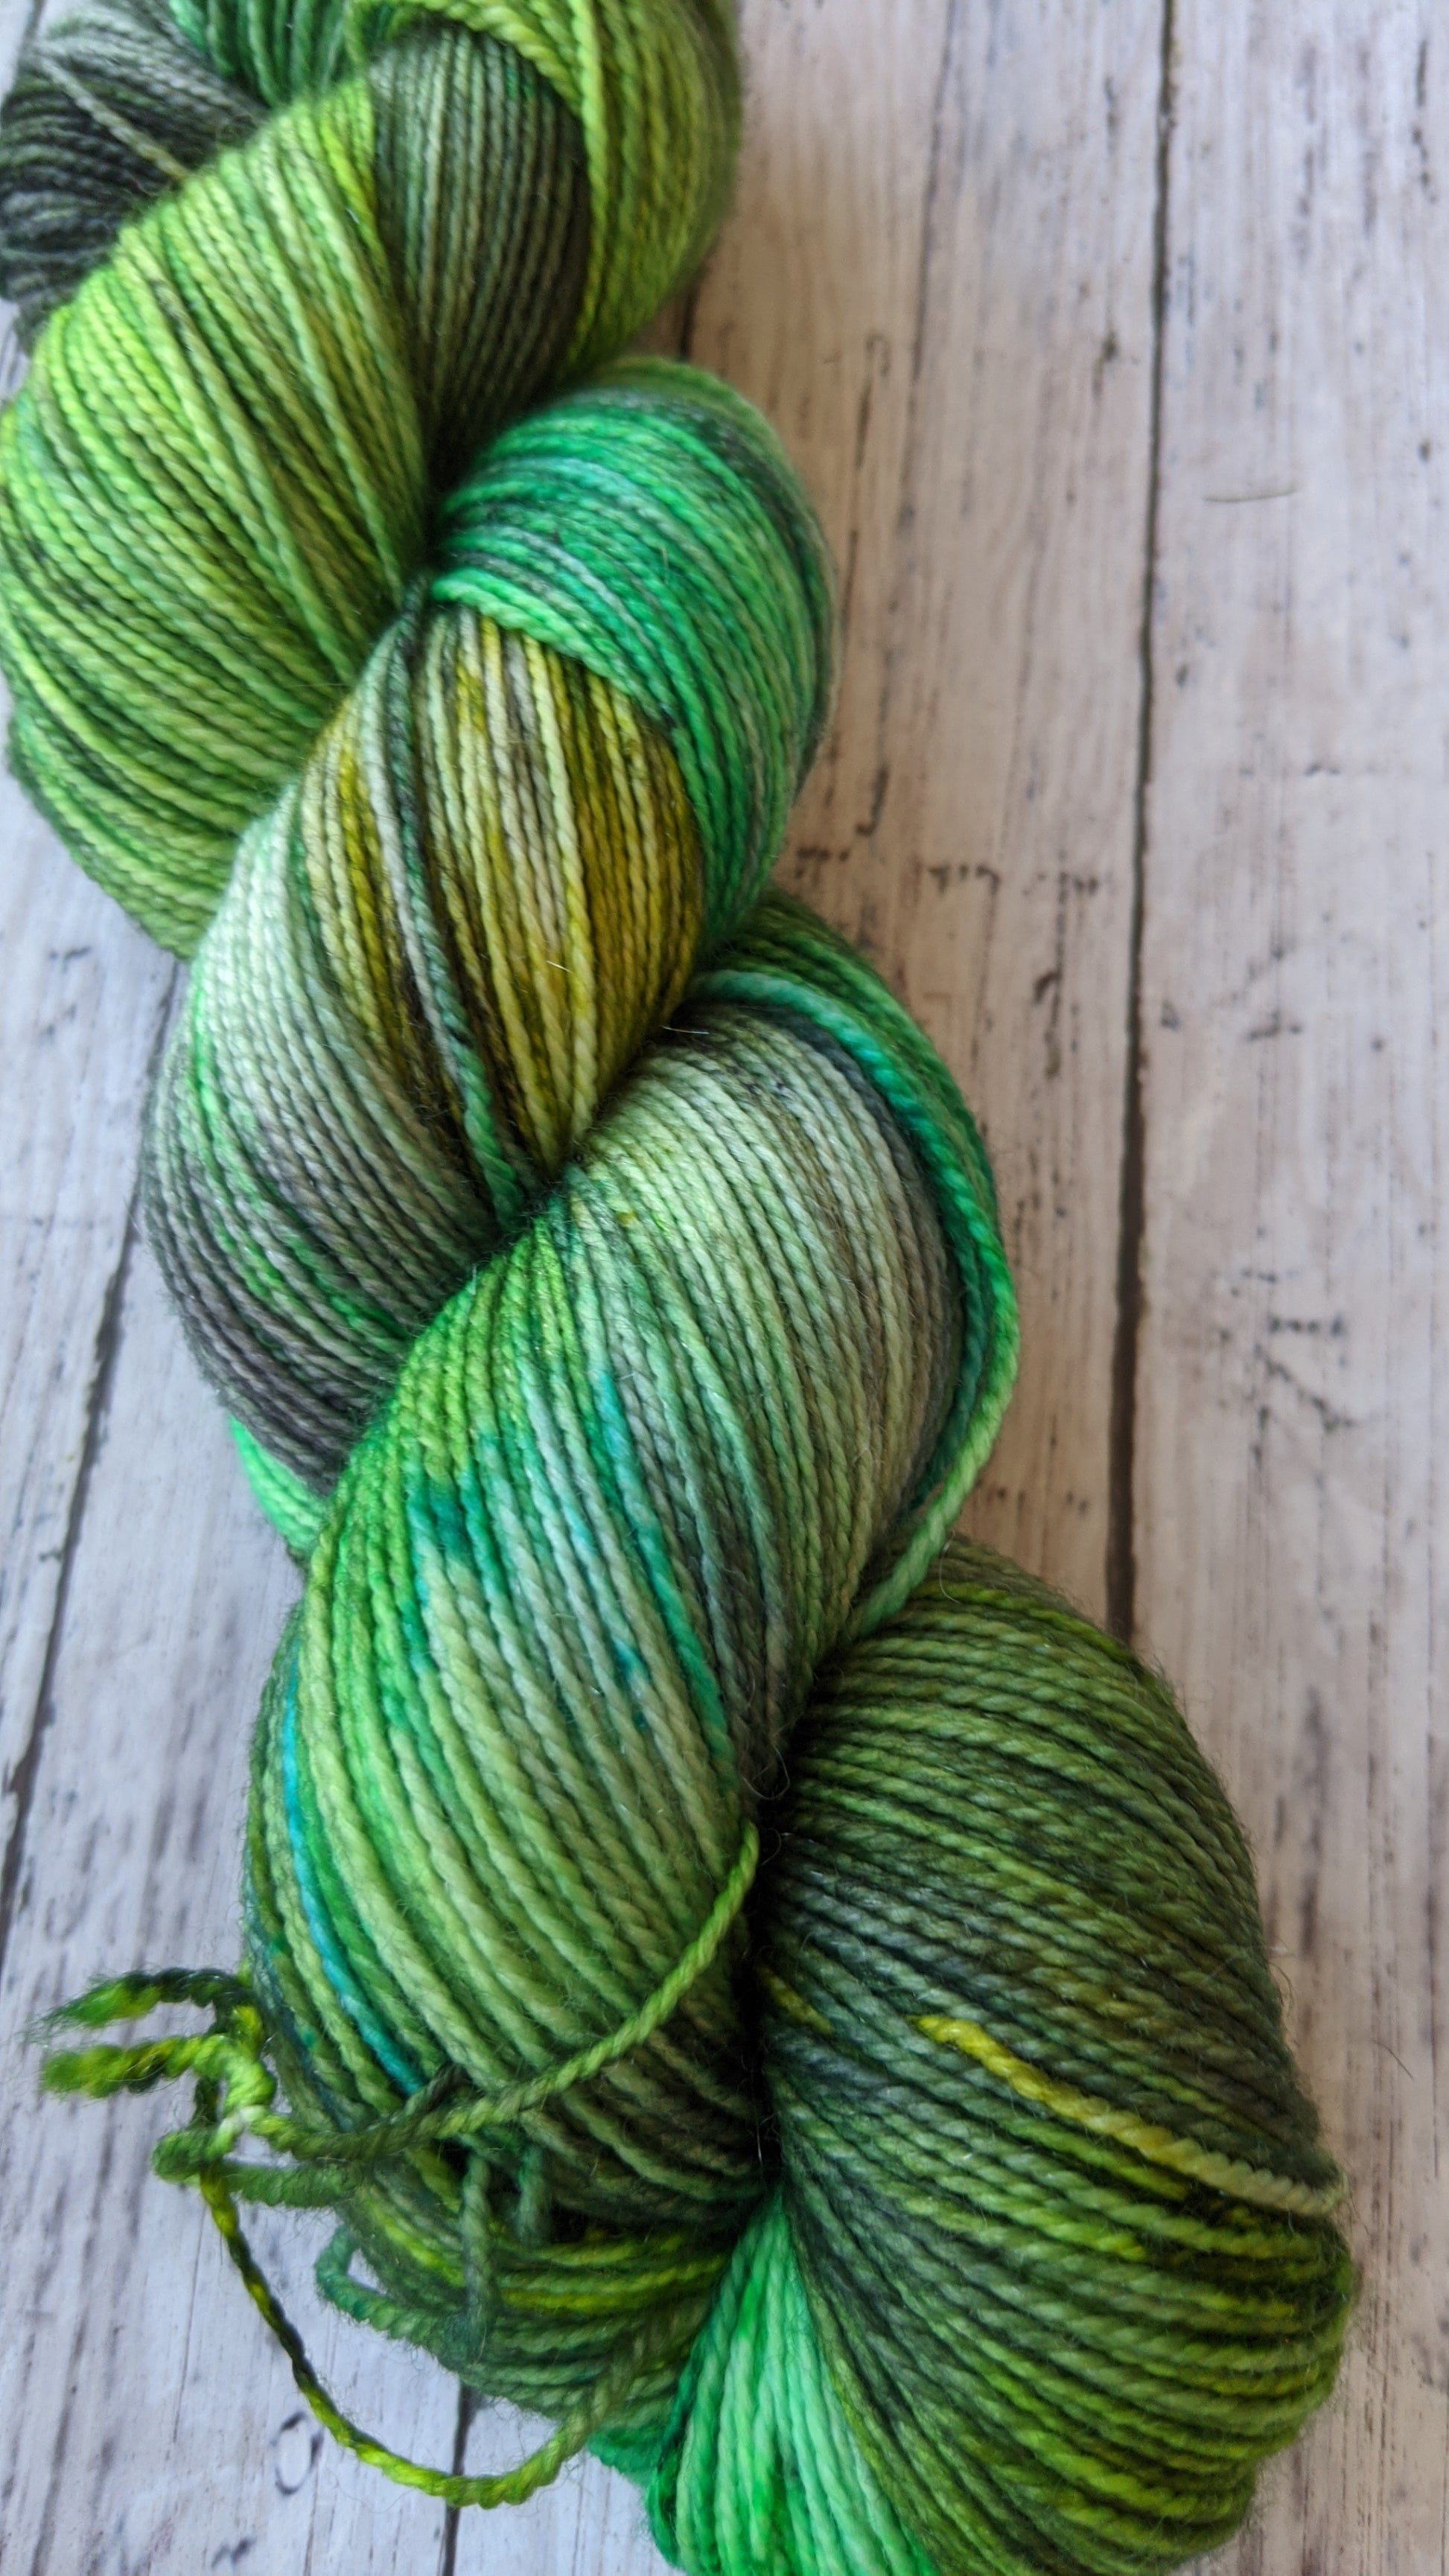 hand dyed various shades of green yarn with black speckles